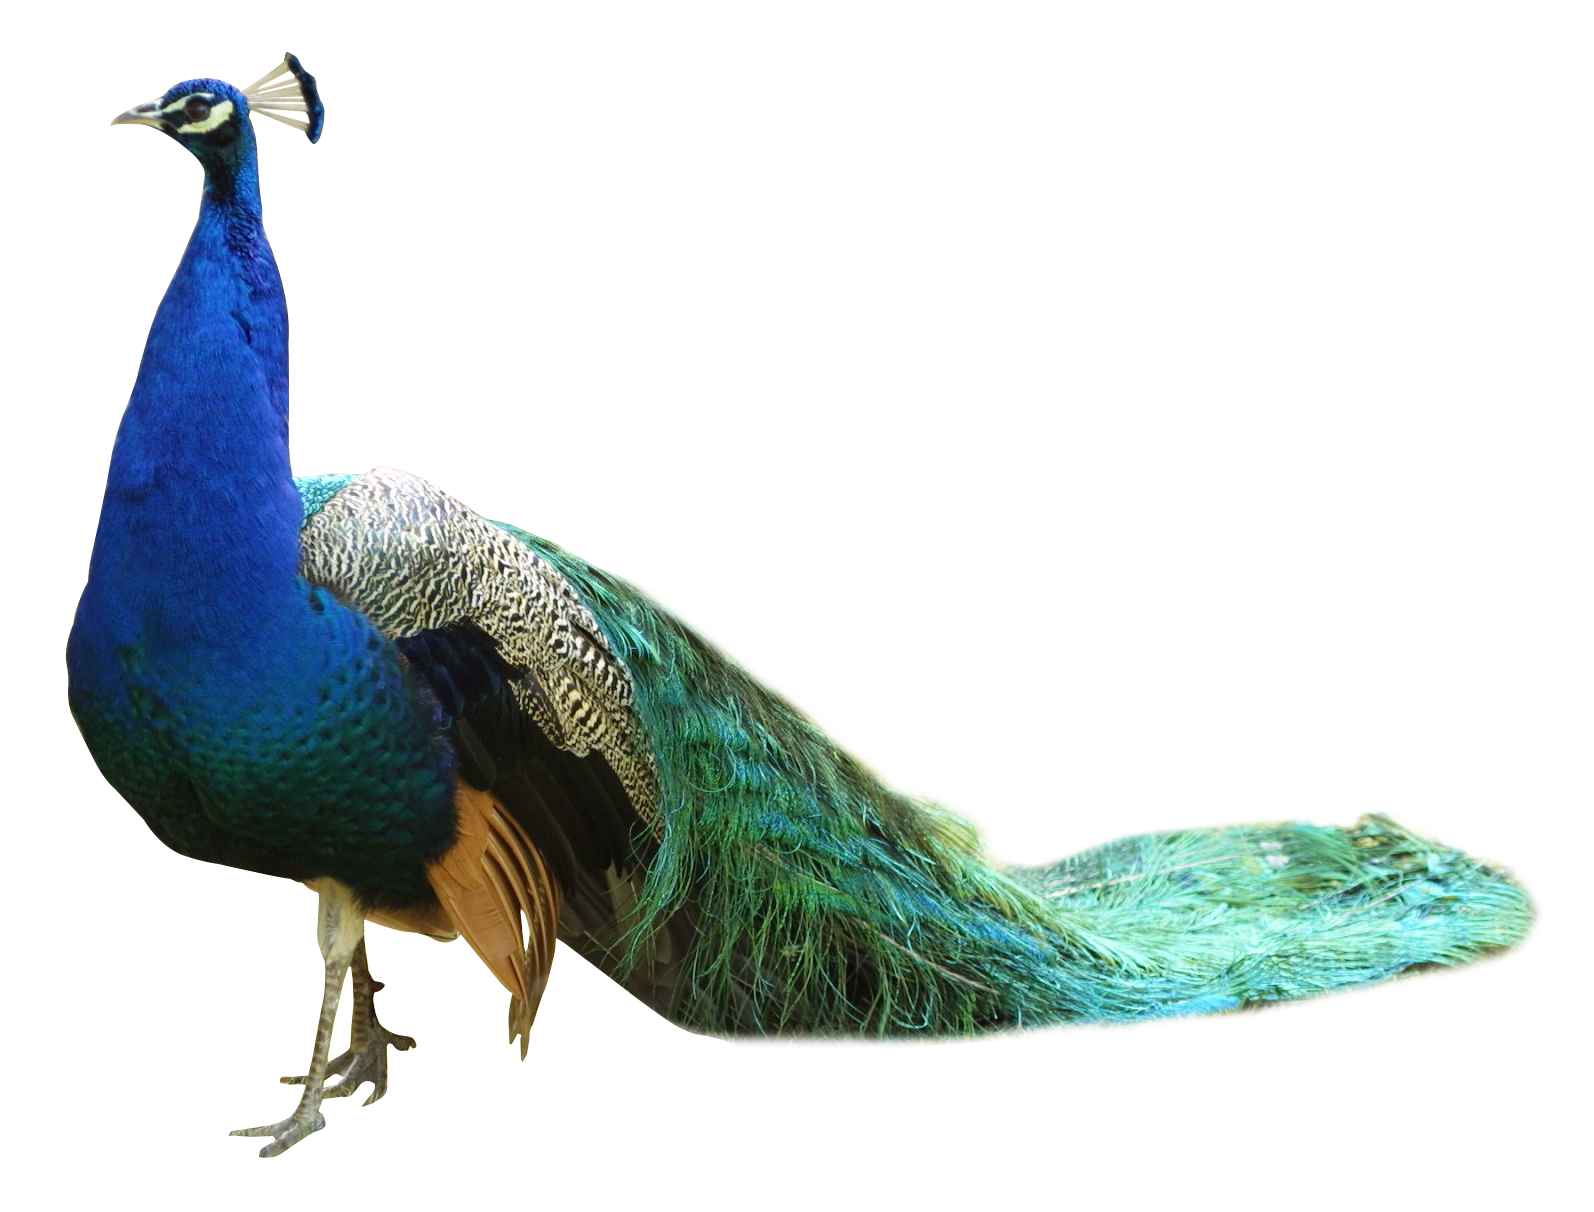 Png image purepng free. Peacock clipart turquoise